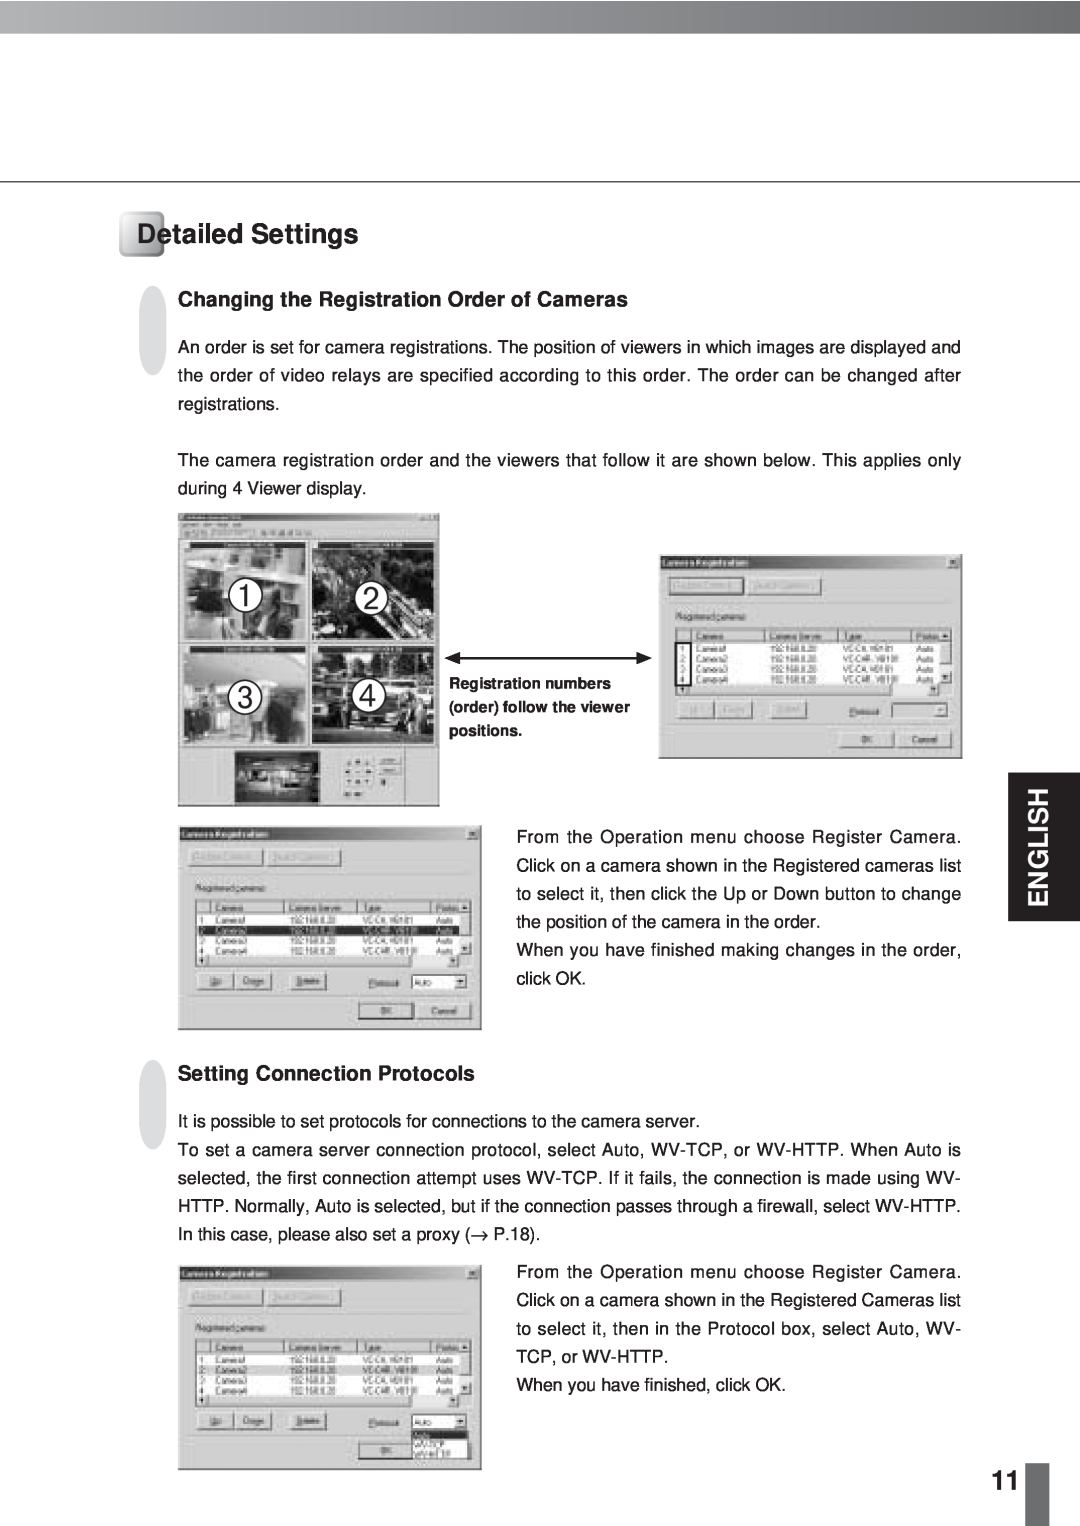 Canon 2.1 user manual Detailed Settings, English, Changing the Registration Order of Cameras, Setting Connection Protocols 